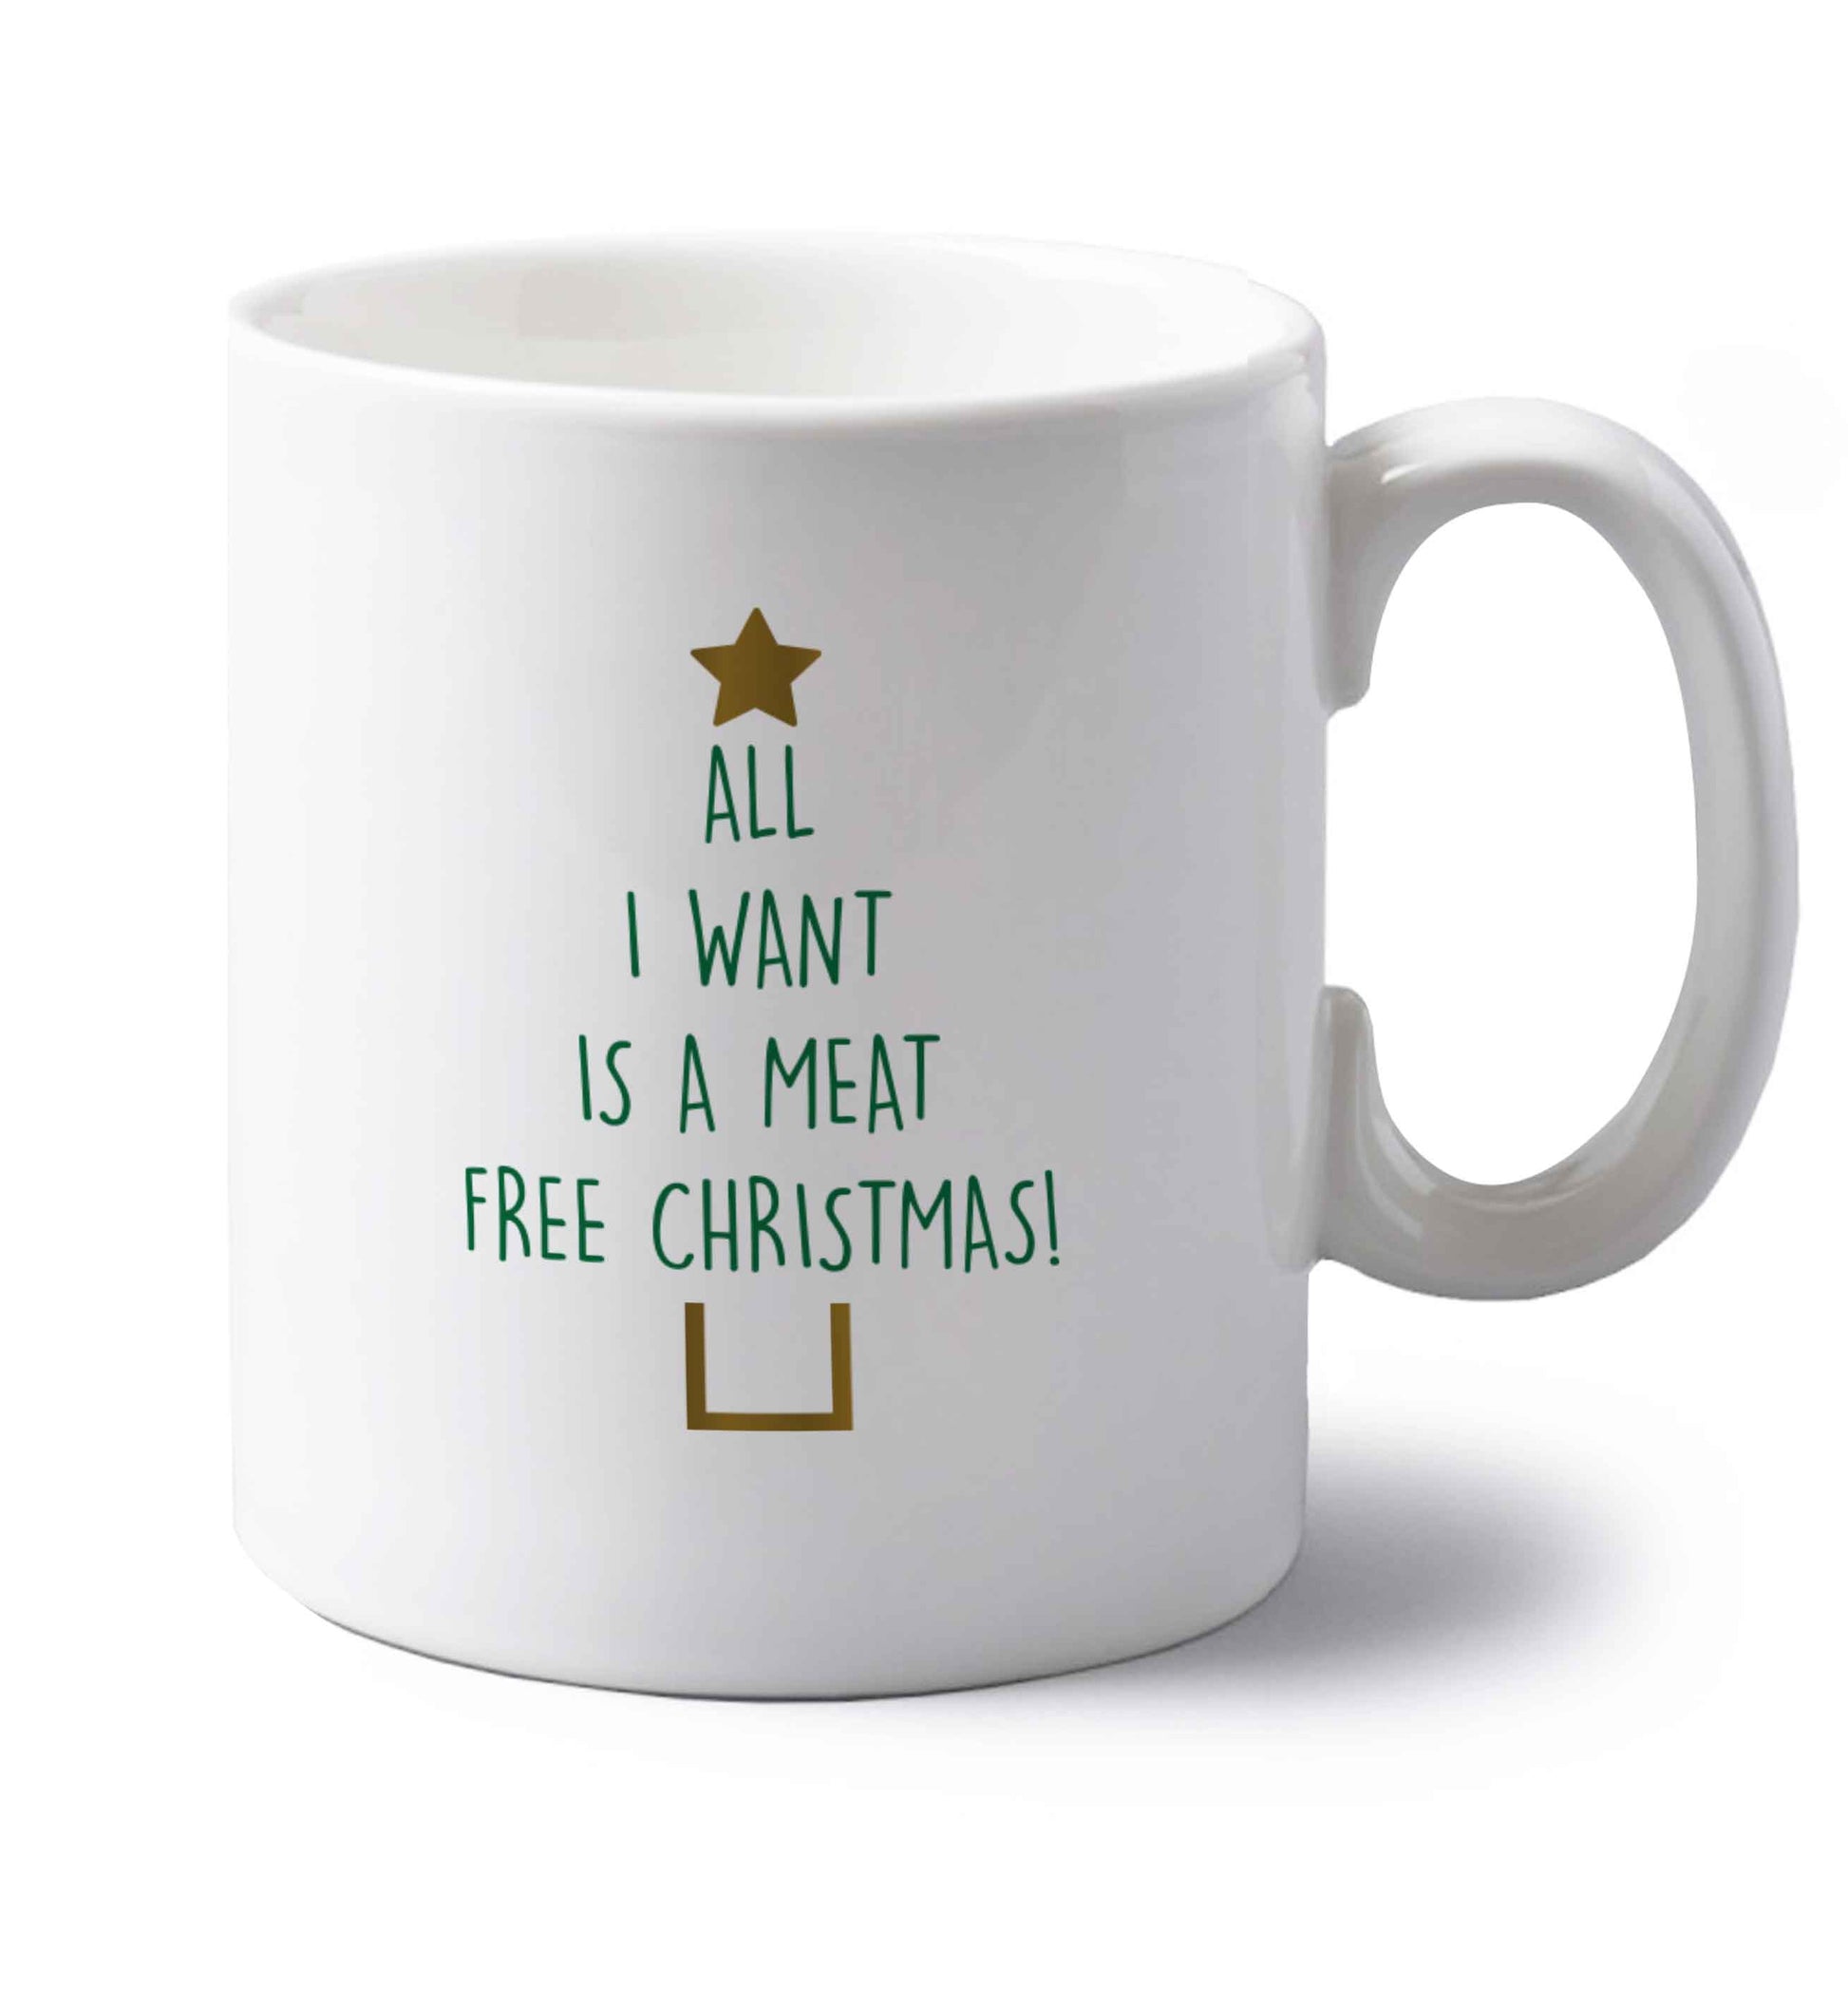 All I want is a meat free Christmas left handed white ceramic mug 